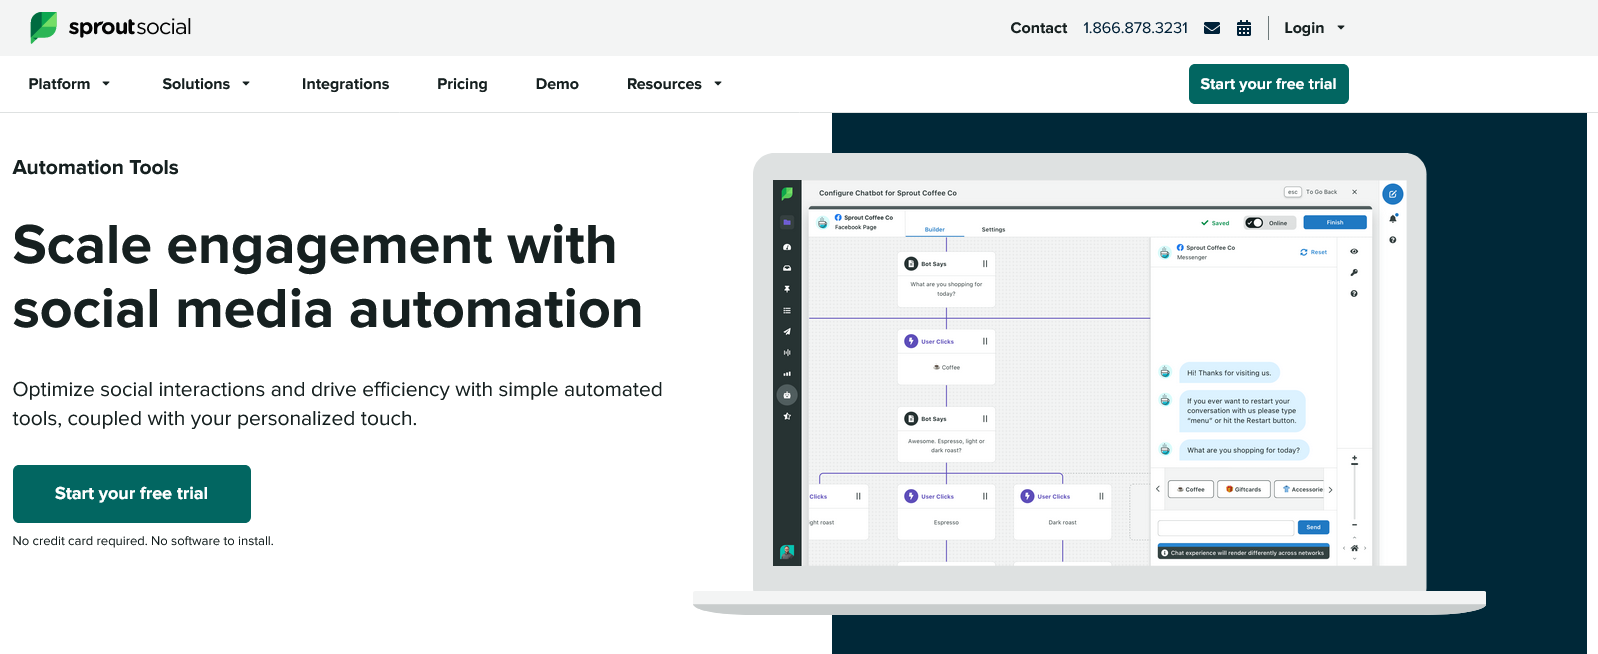 Marketing automation tool Sprout Social